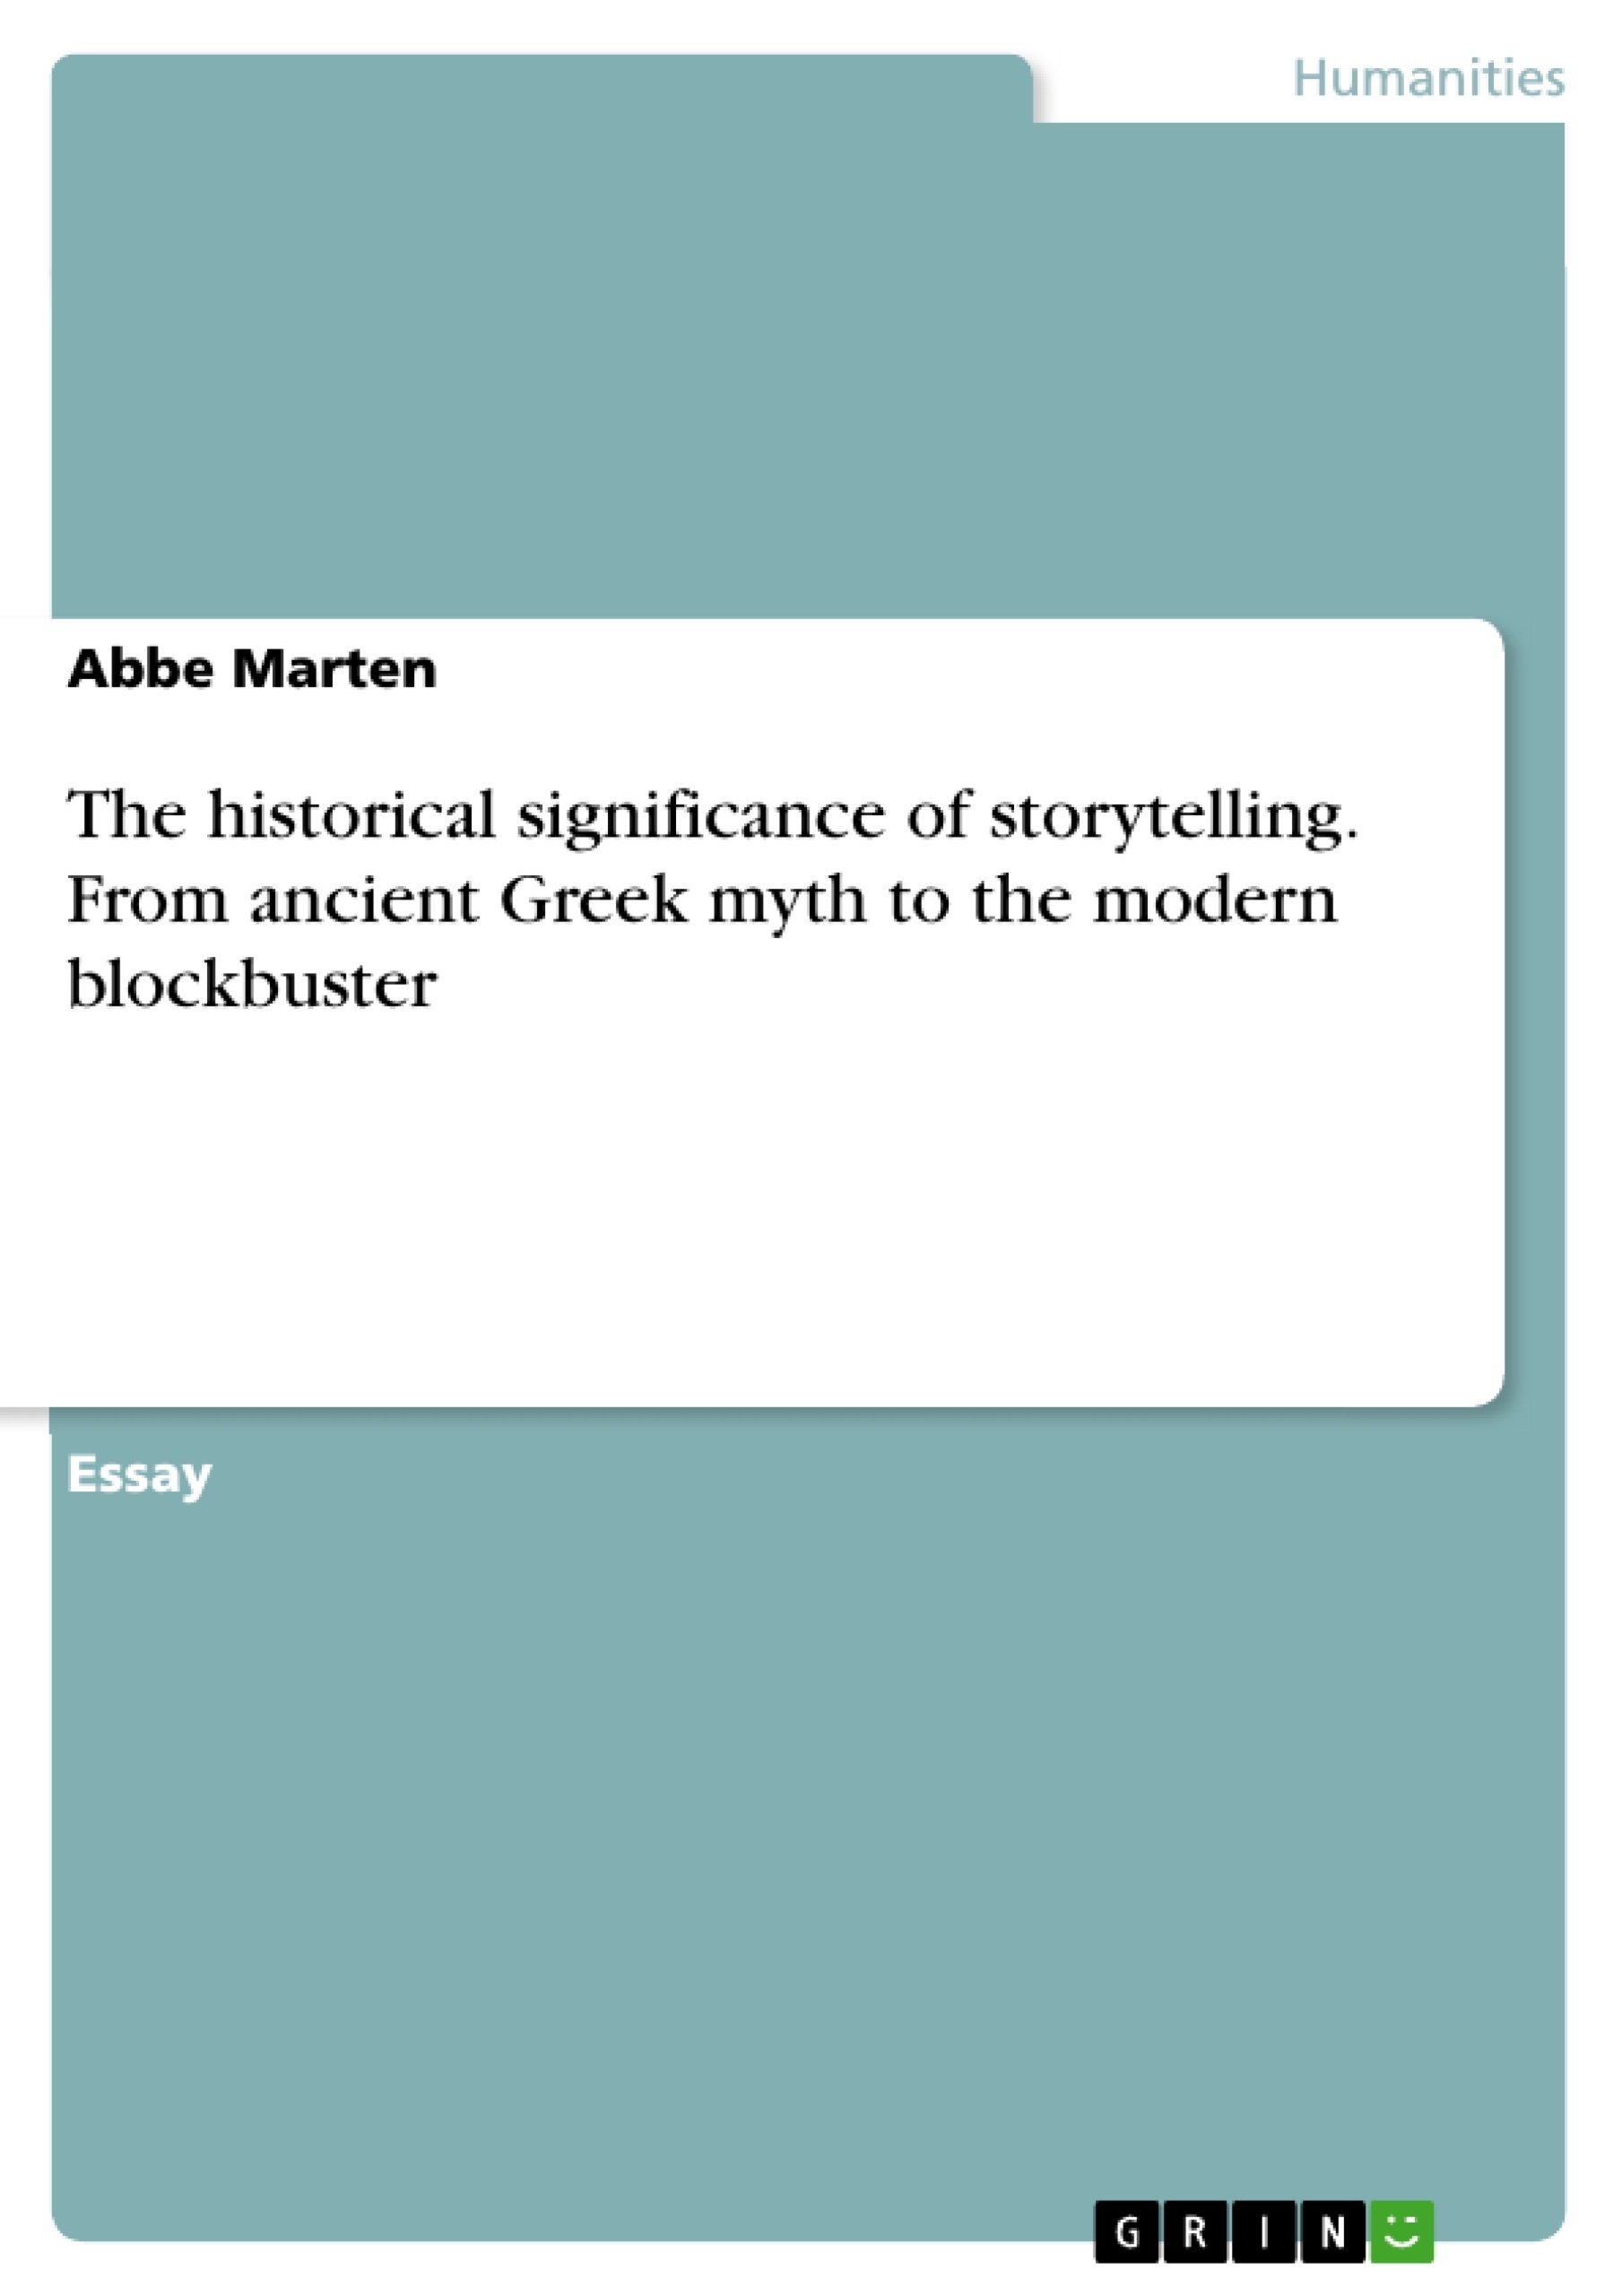 the　Greek　ancient　of　significance　From　storytelling.　to　The　modern　blockbuster　historical　myth　GRIN